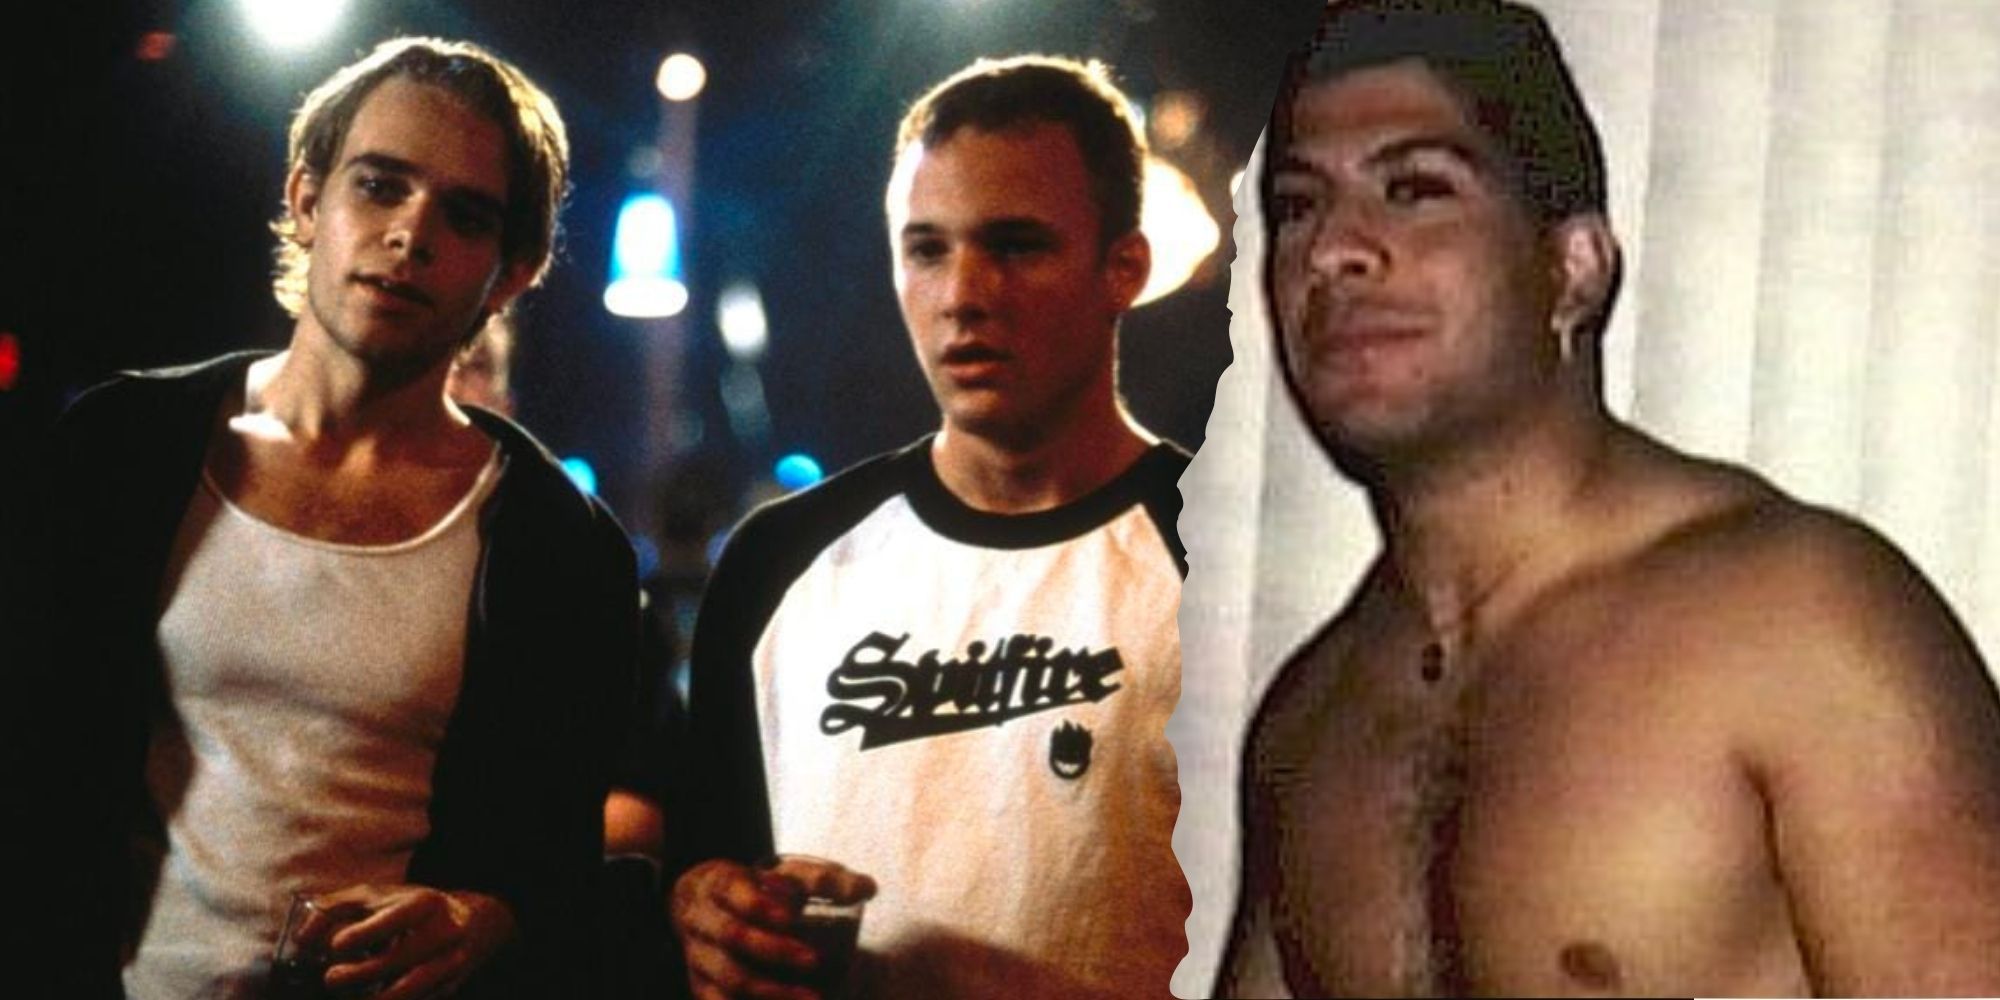 Bobby Kent and Marty Puccio in Bully and Bobby Kent in real life